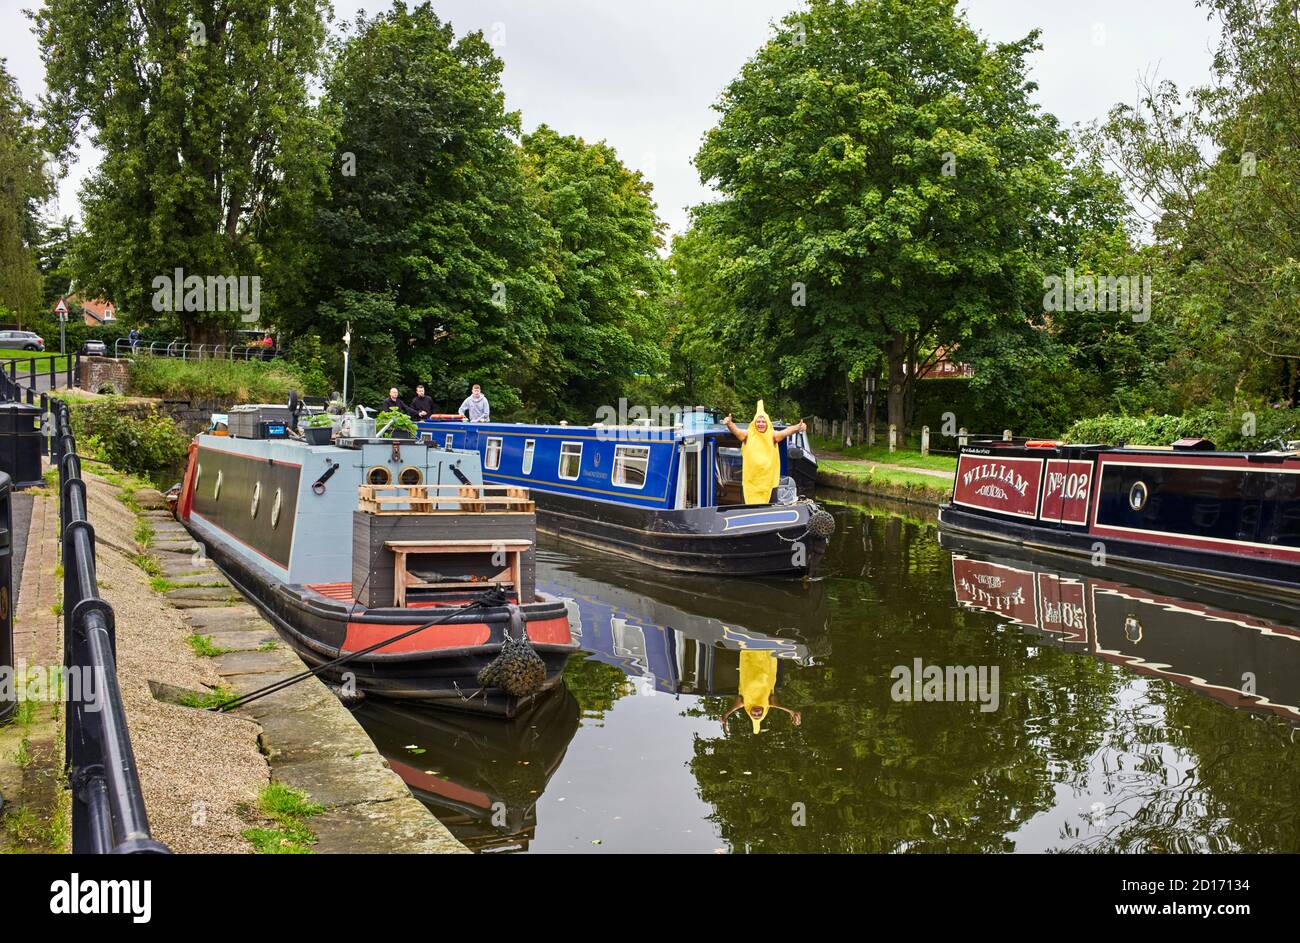 Man dressed as a banana on front of a narrowboat as it come in to moor up at Lymm in Cheshire Stock Photo